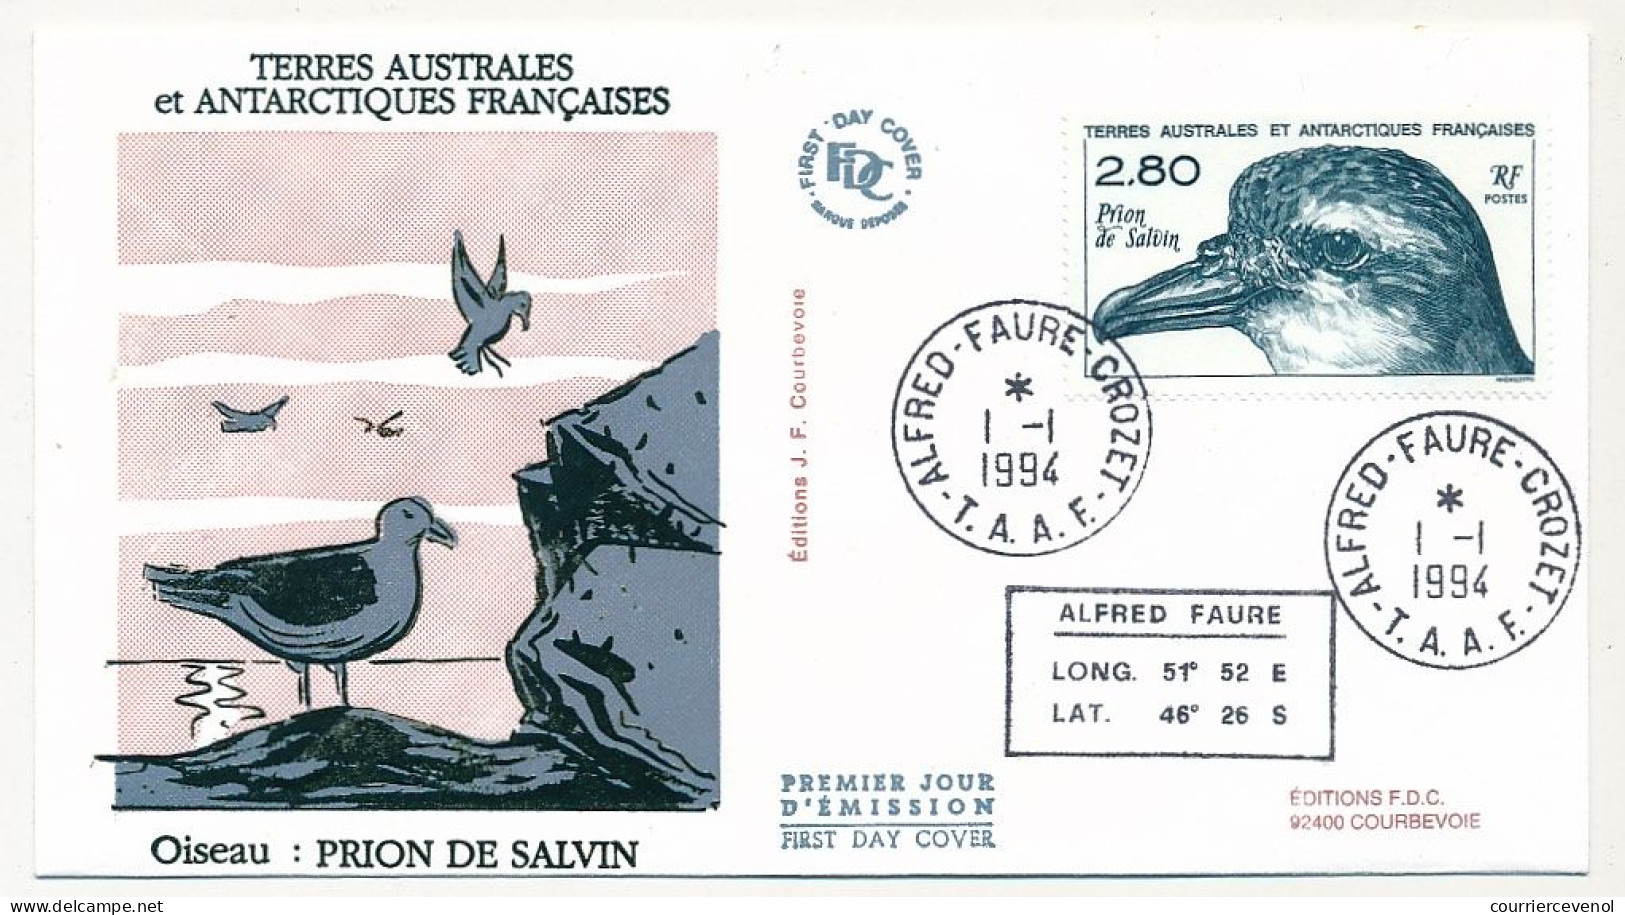 TAAF - Enveloppe FDC - 2,80 Prion De Salvin - Alfred Faure Crozet - 1-1-1994 - FDC